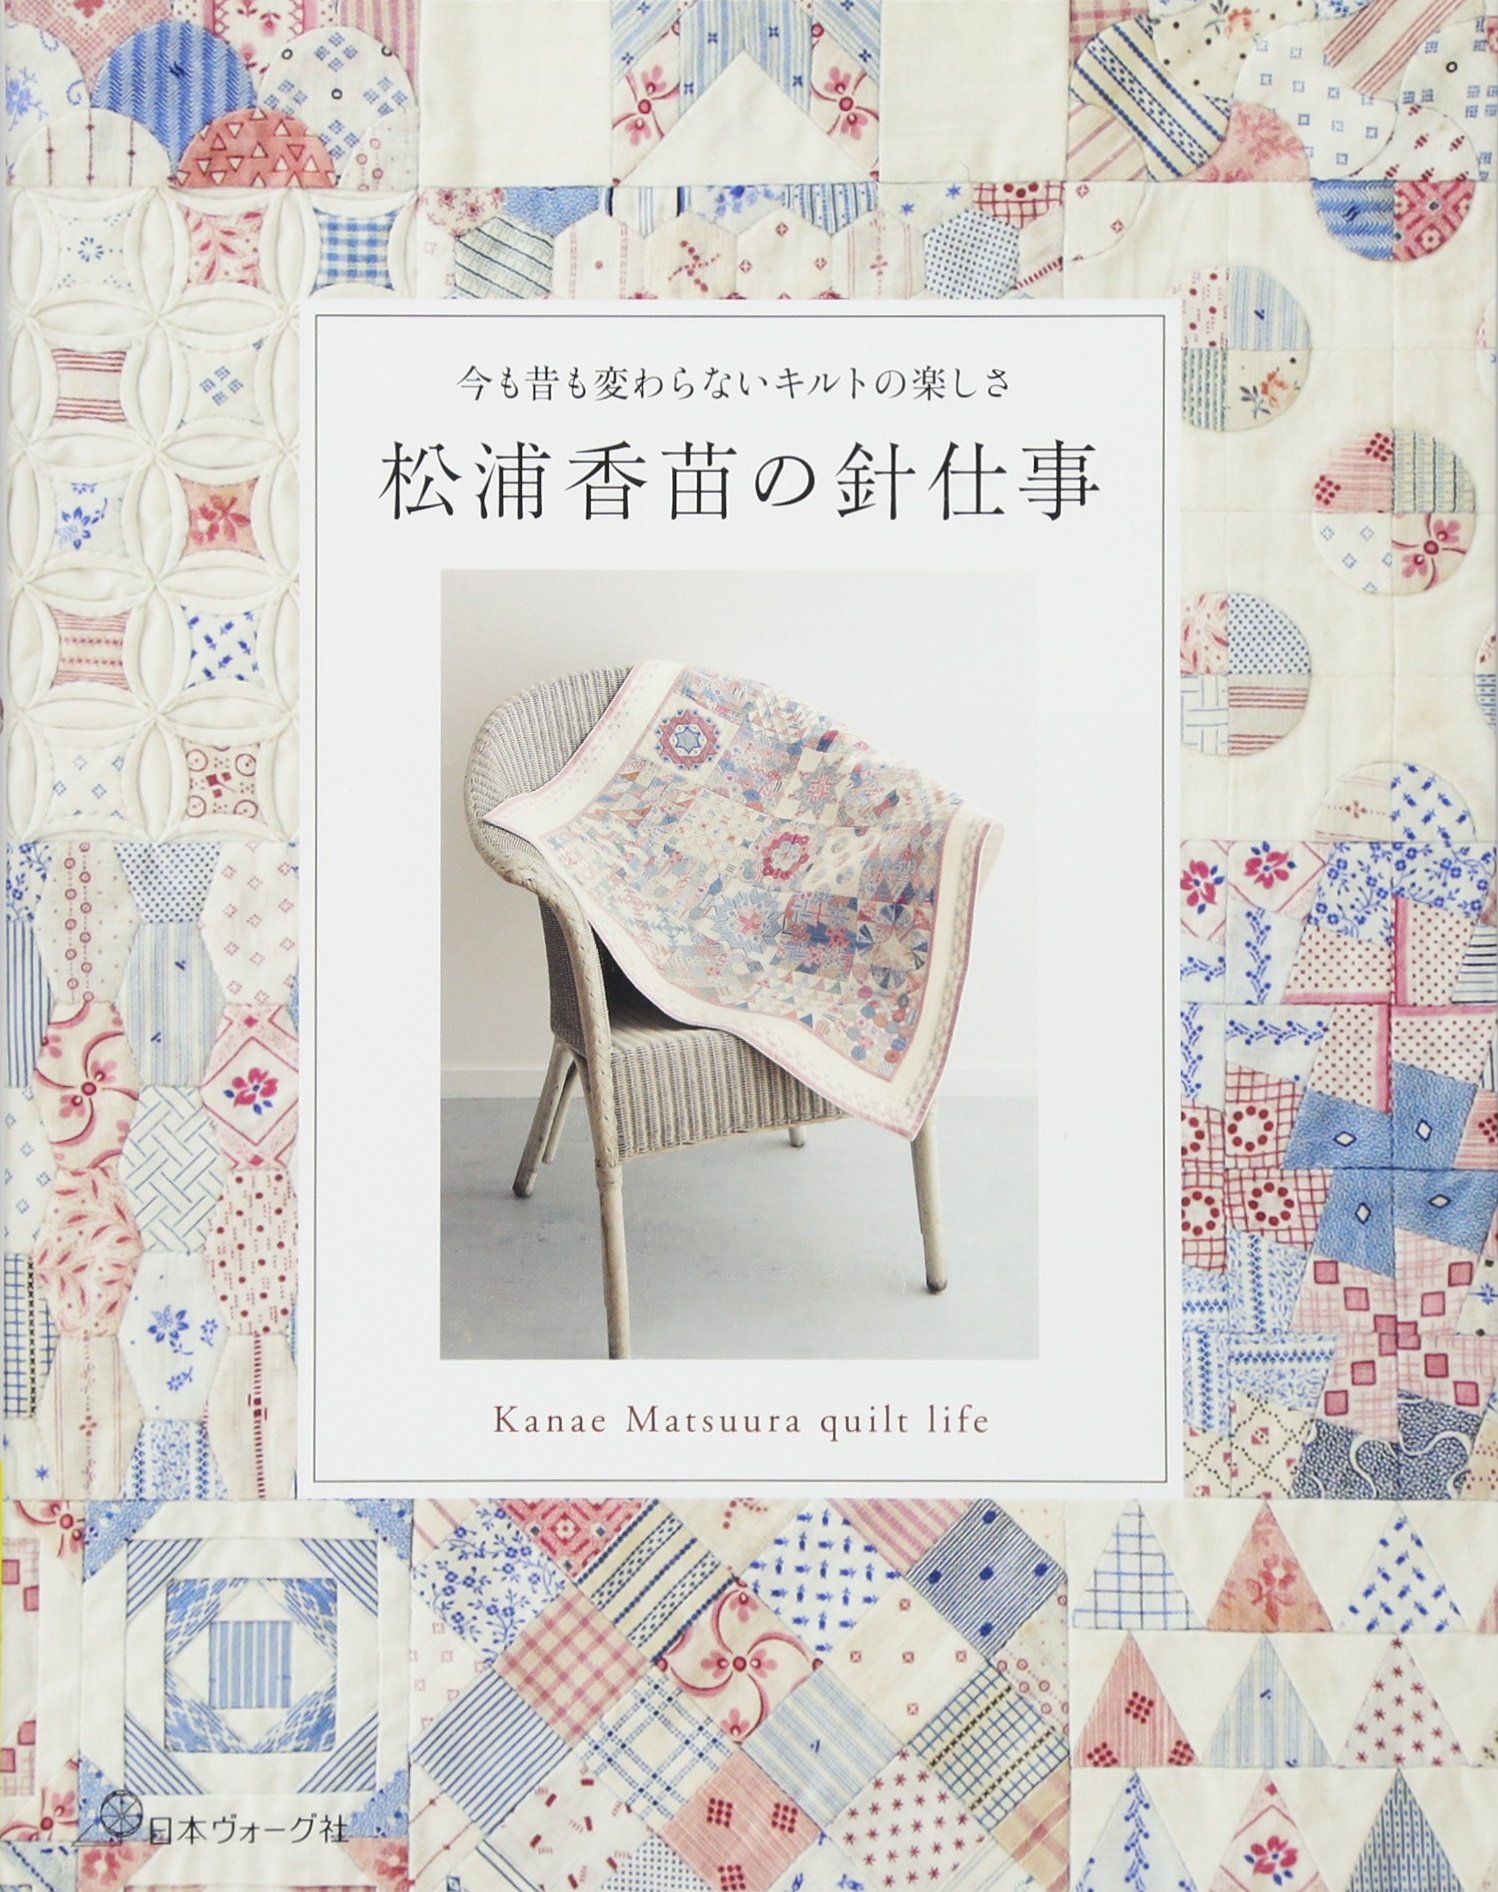 Kanae Matsuura of needlework quilt also does not change the old days